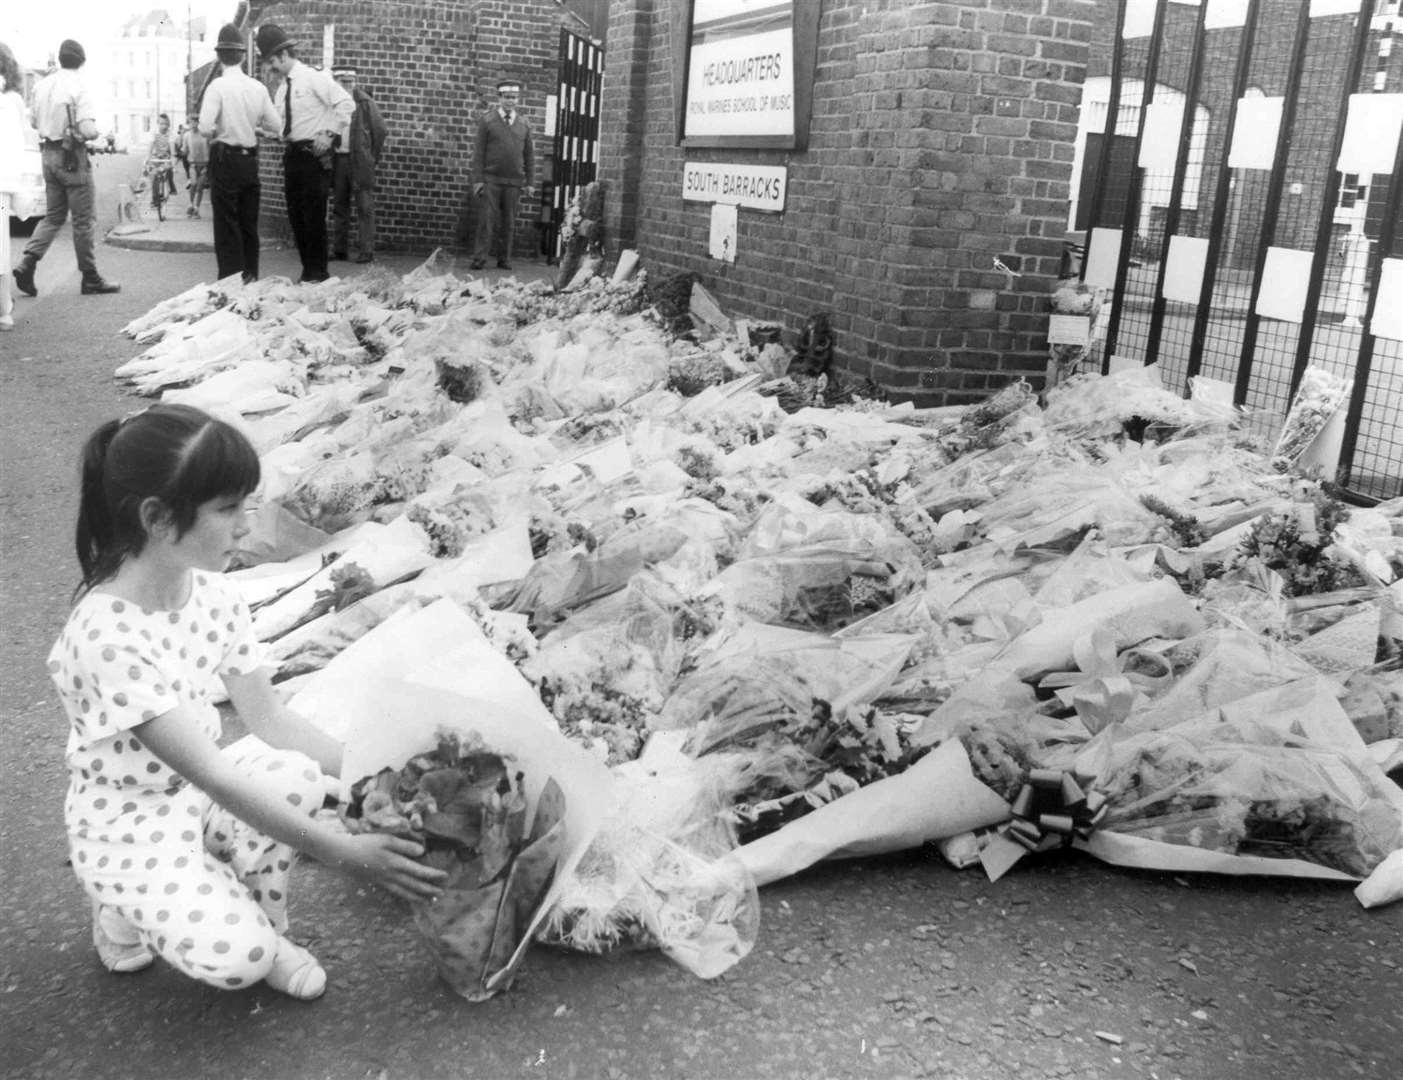 Floral tributes are left to the victims of those killed in the IRA attack